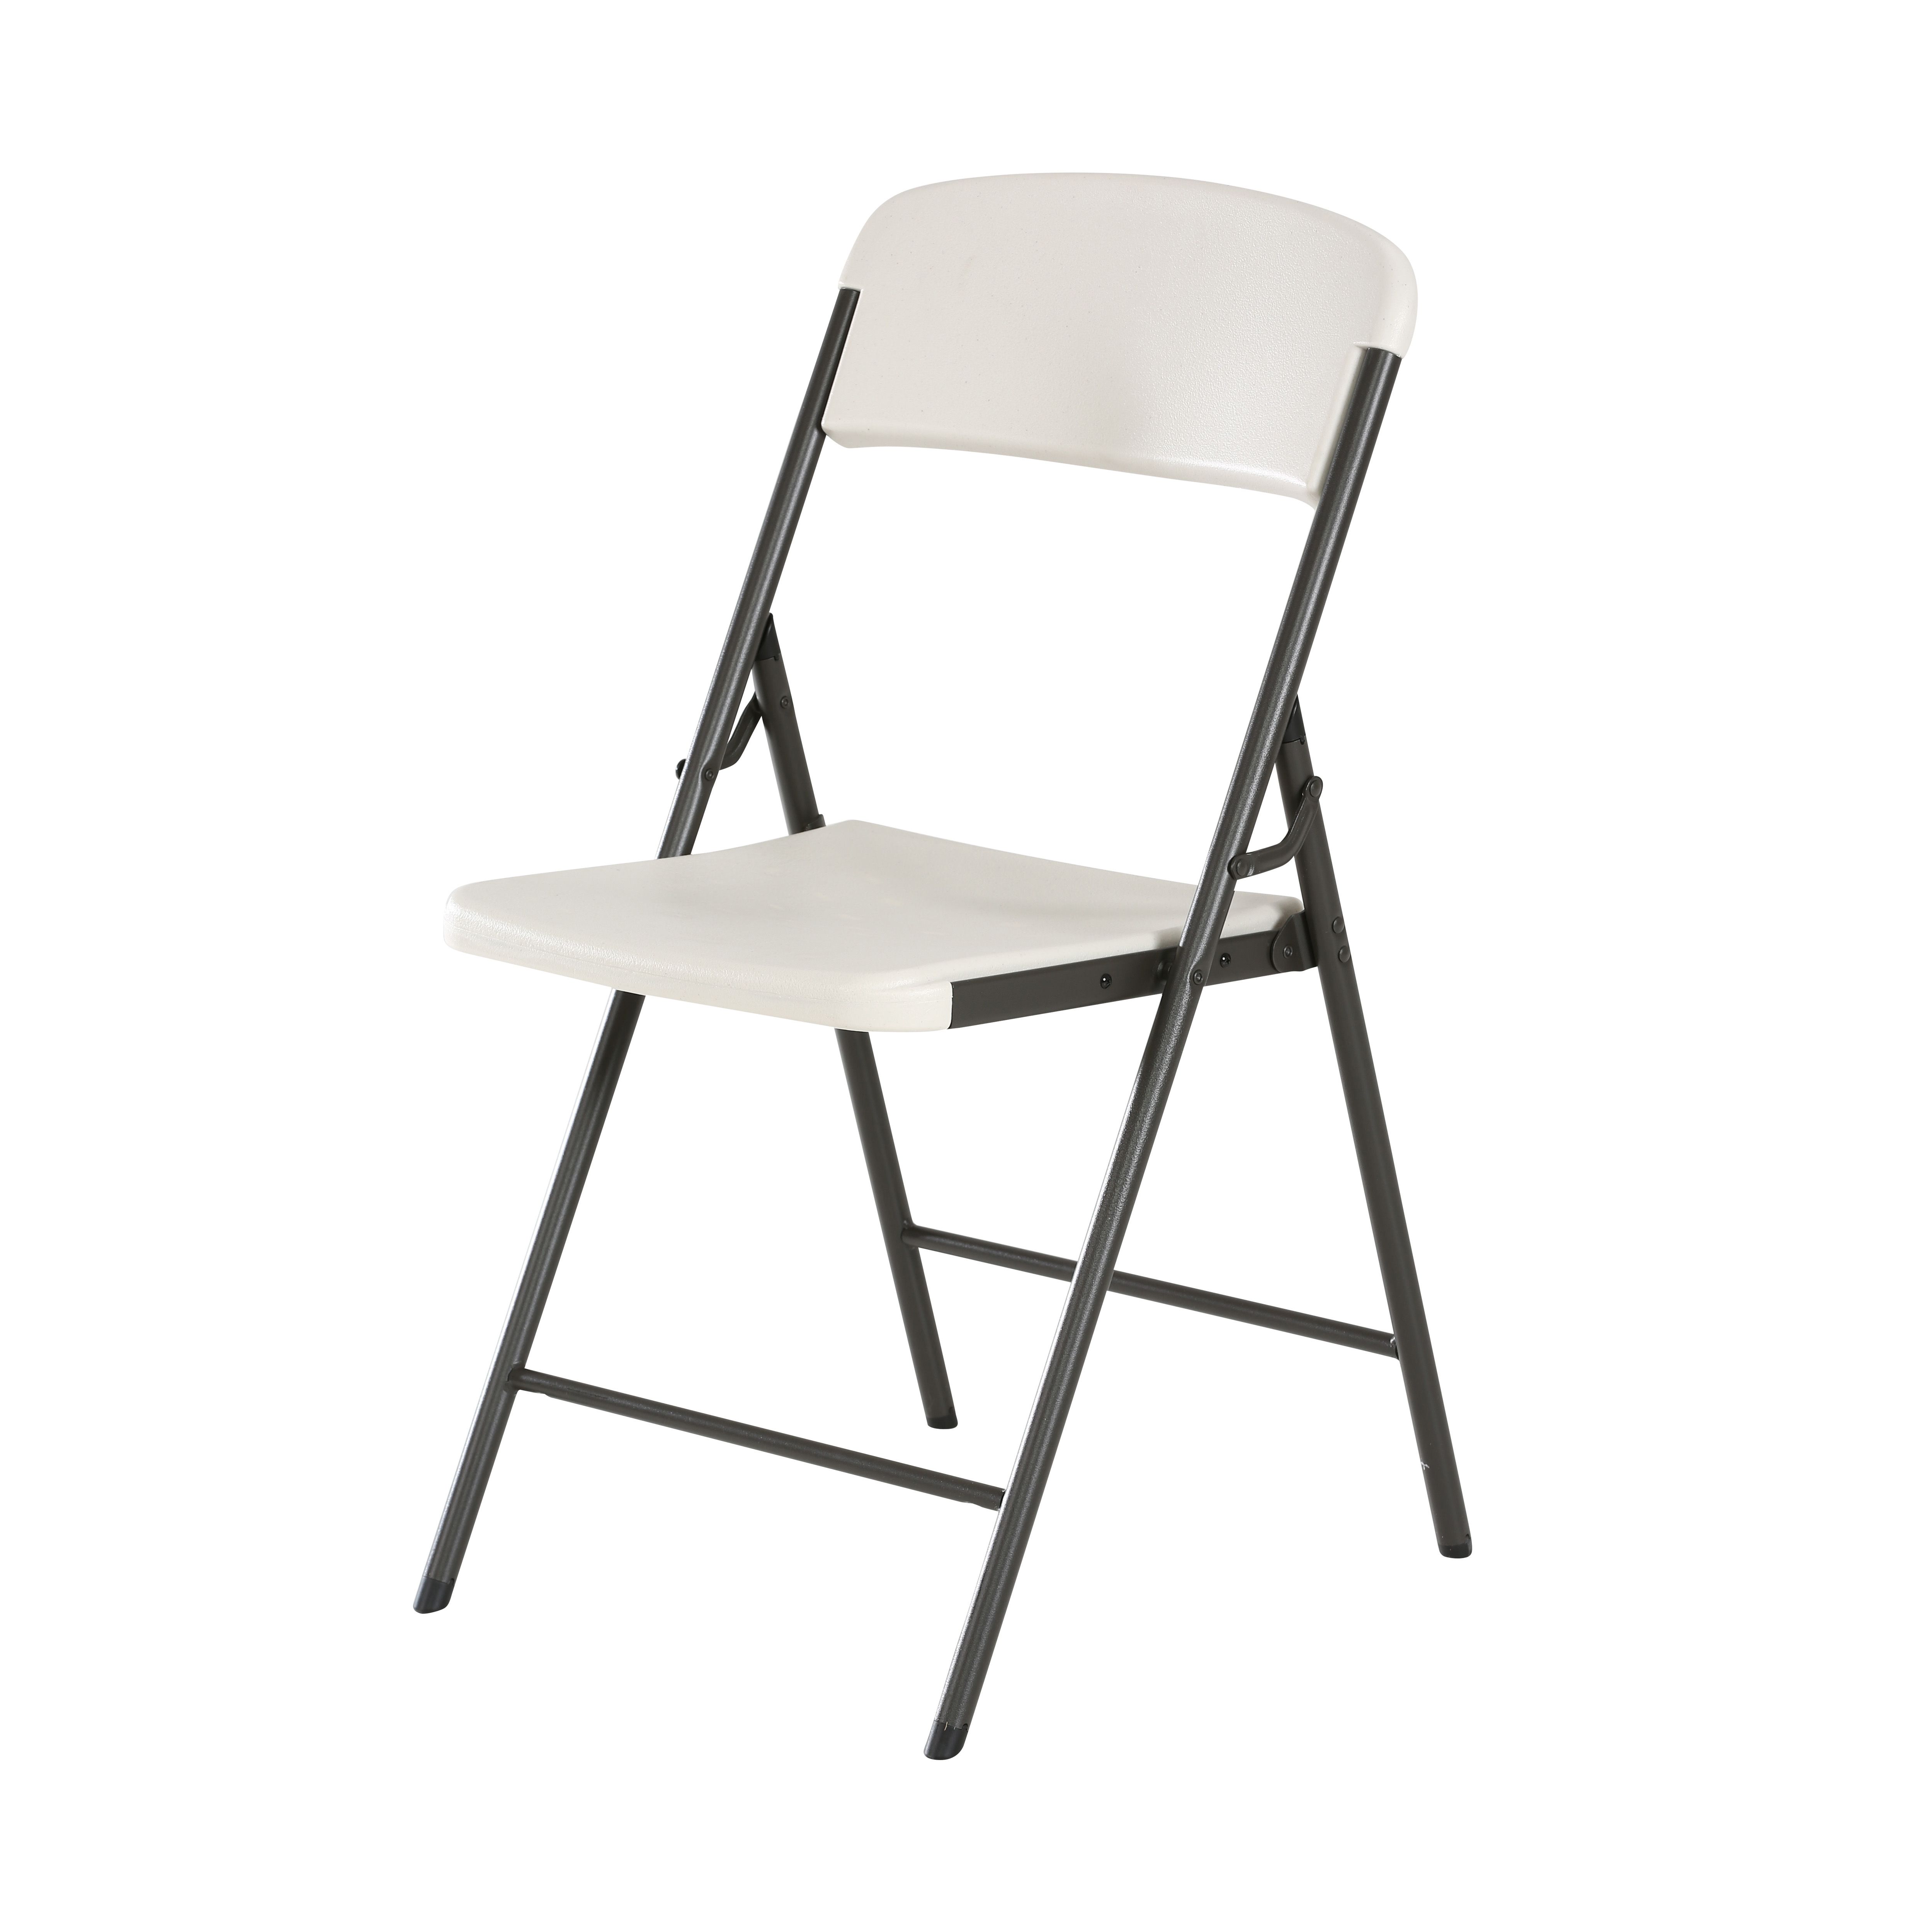 Blooma Memphis White Plastic Foldable Chair